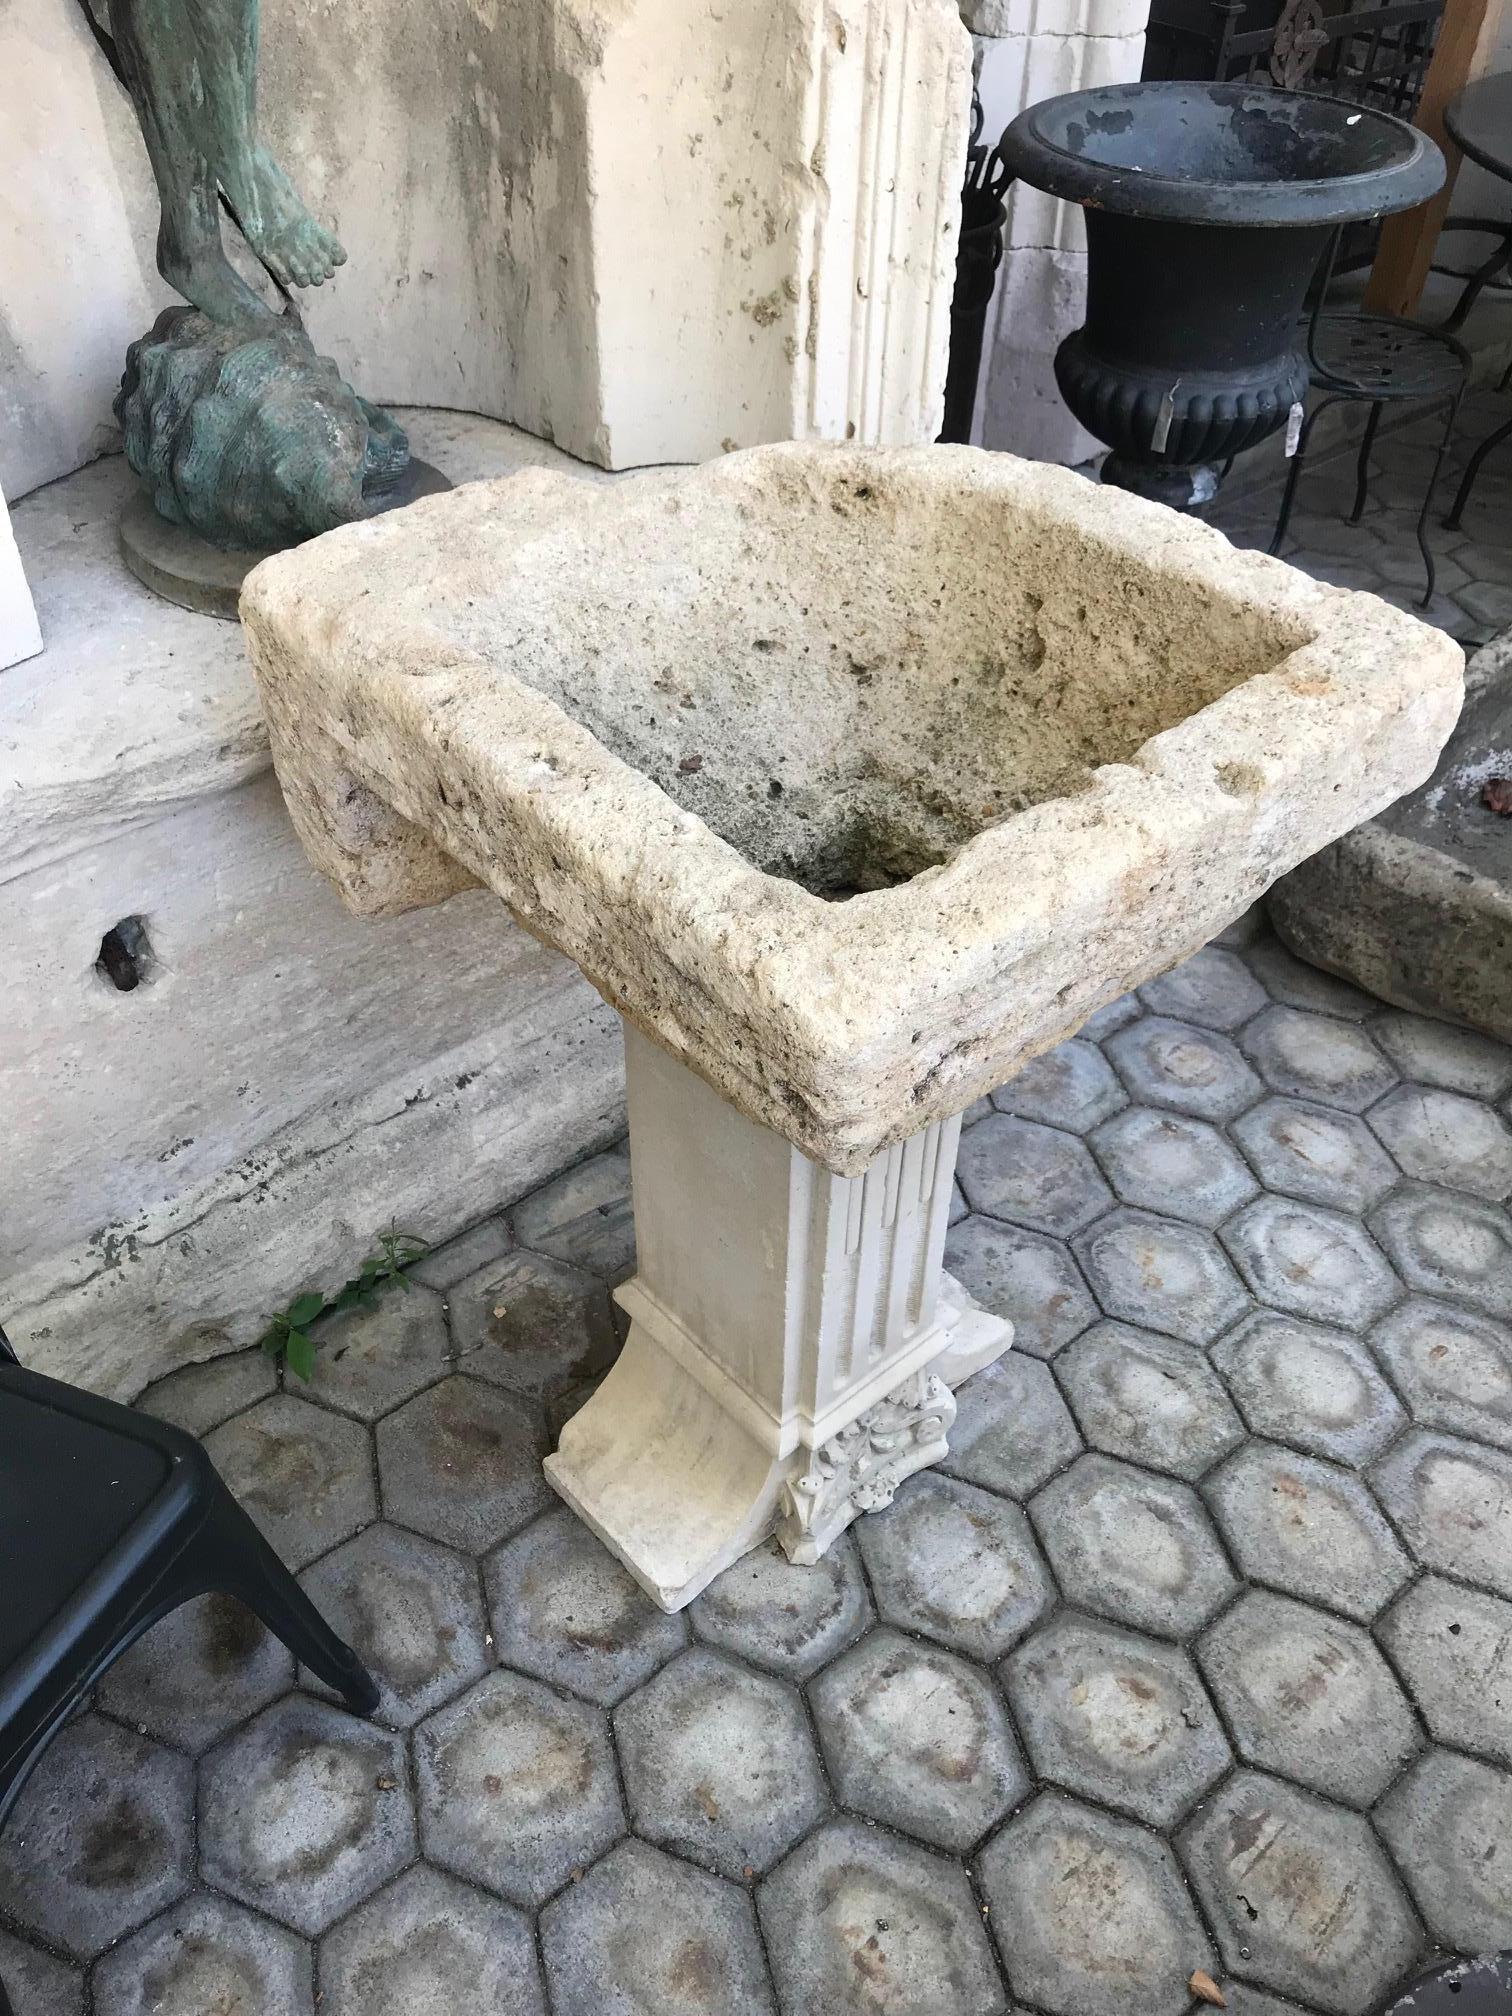 Hand-Carved Hand Carved Stone Container Basin on Pedestal Base Birdbath Sink Antiques focal